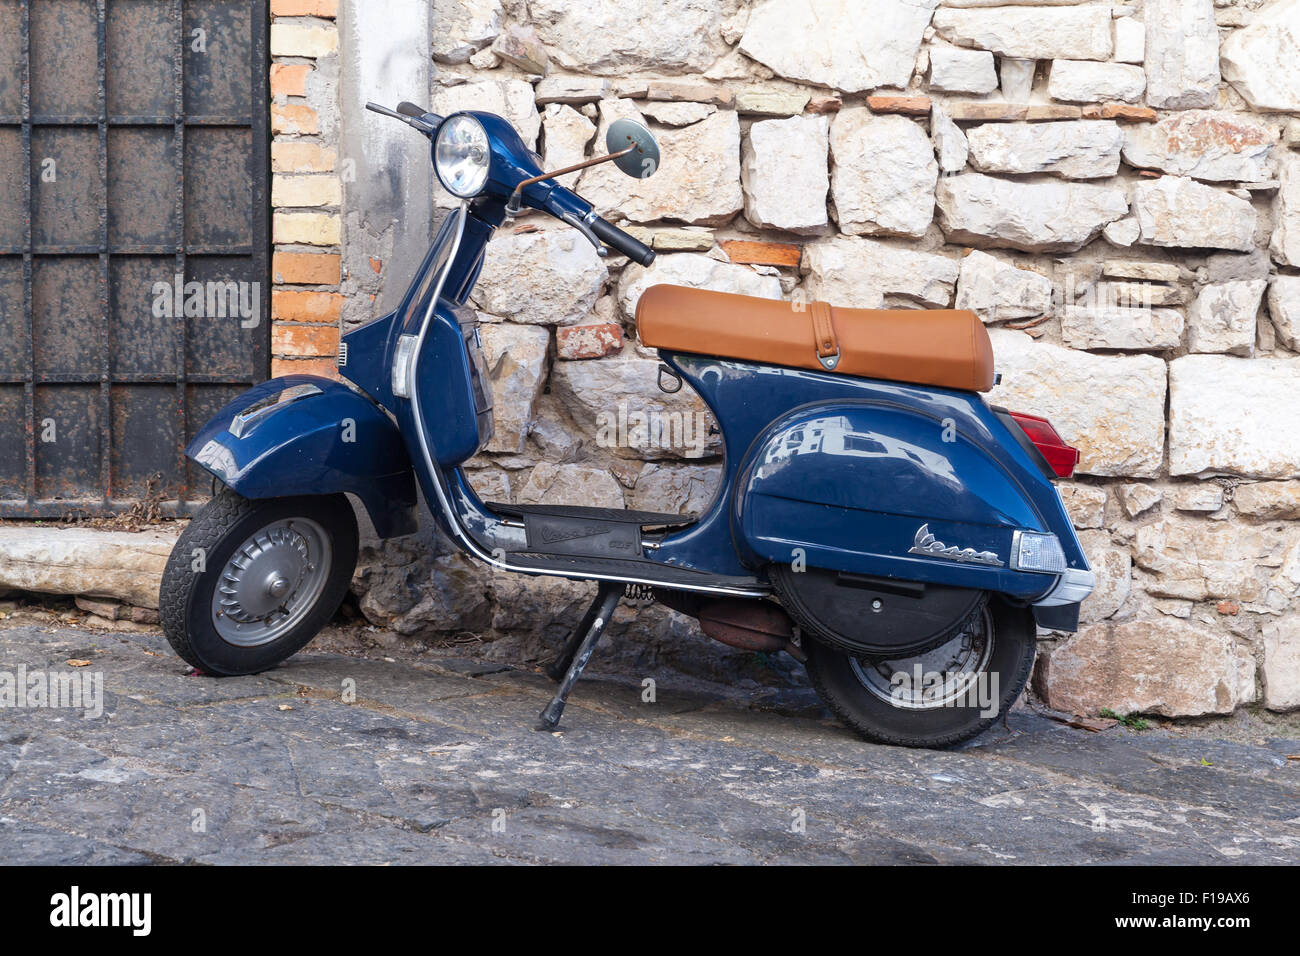 Gaeta, Italy - August 19, 2015: Classic blue Vespa PX 150 scooter stands  parked in a town Stock Photo - Alamy